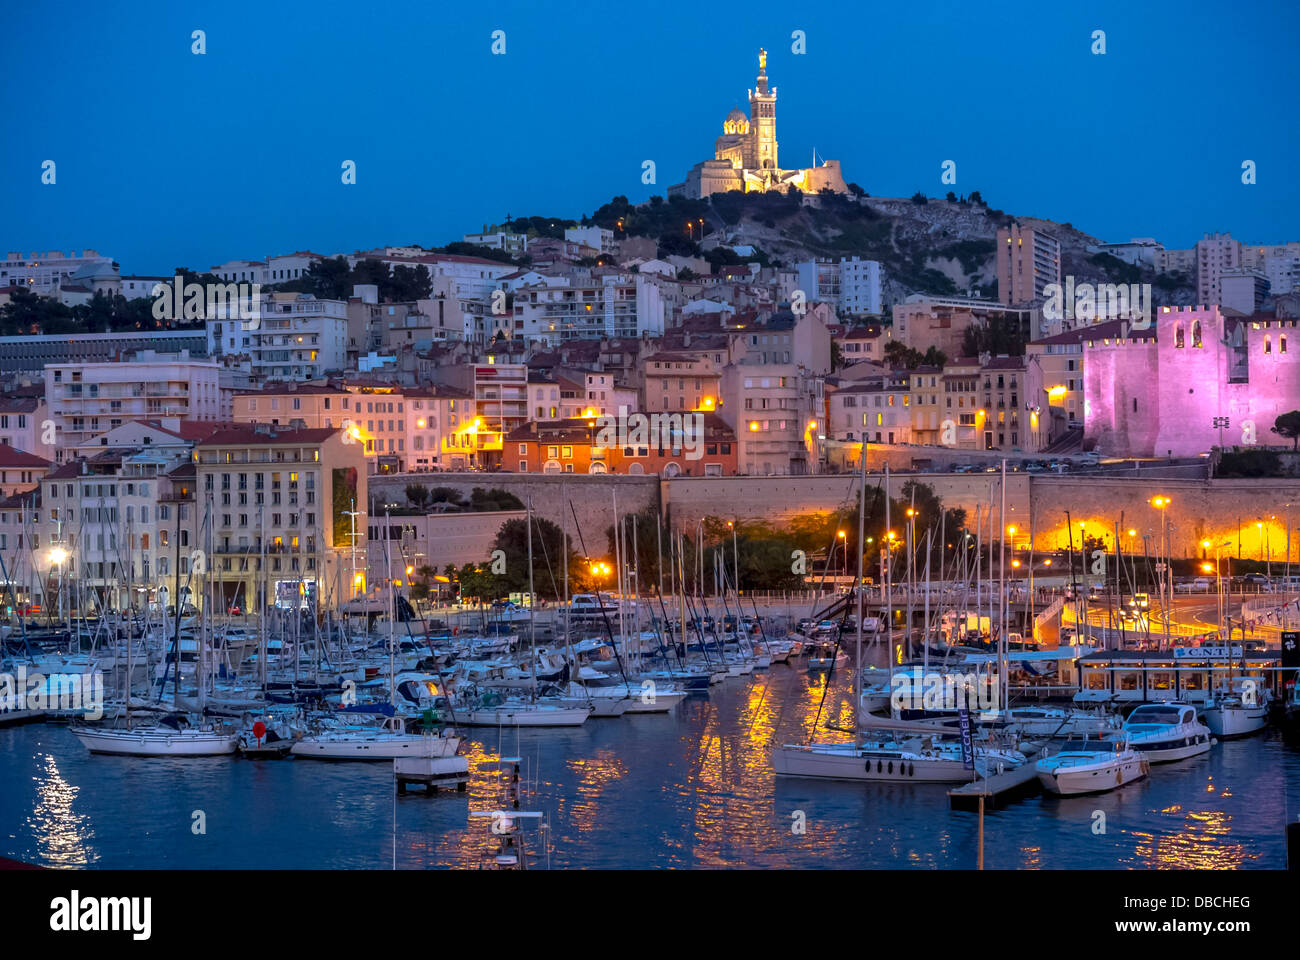 Marseille France, Romantic Cityscapes of Vieux Port area, at Dusk Stock Photo